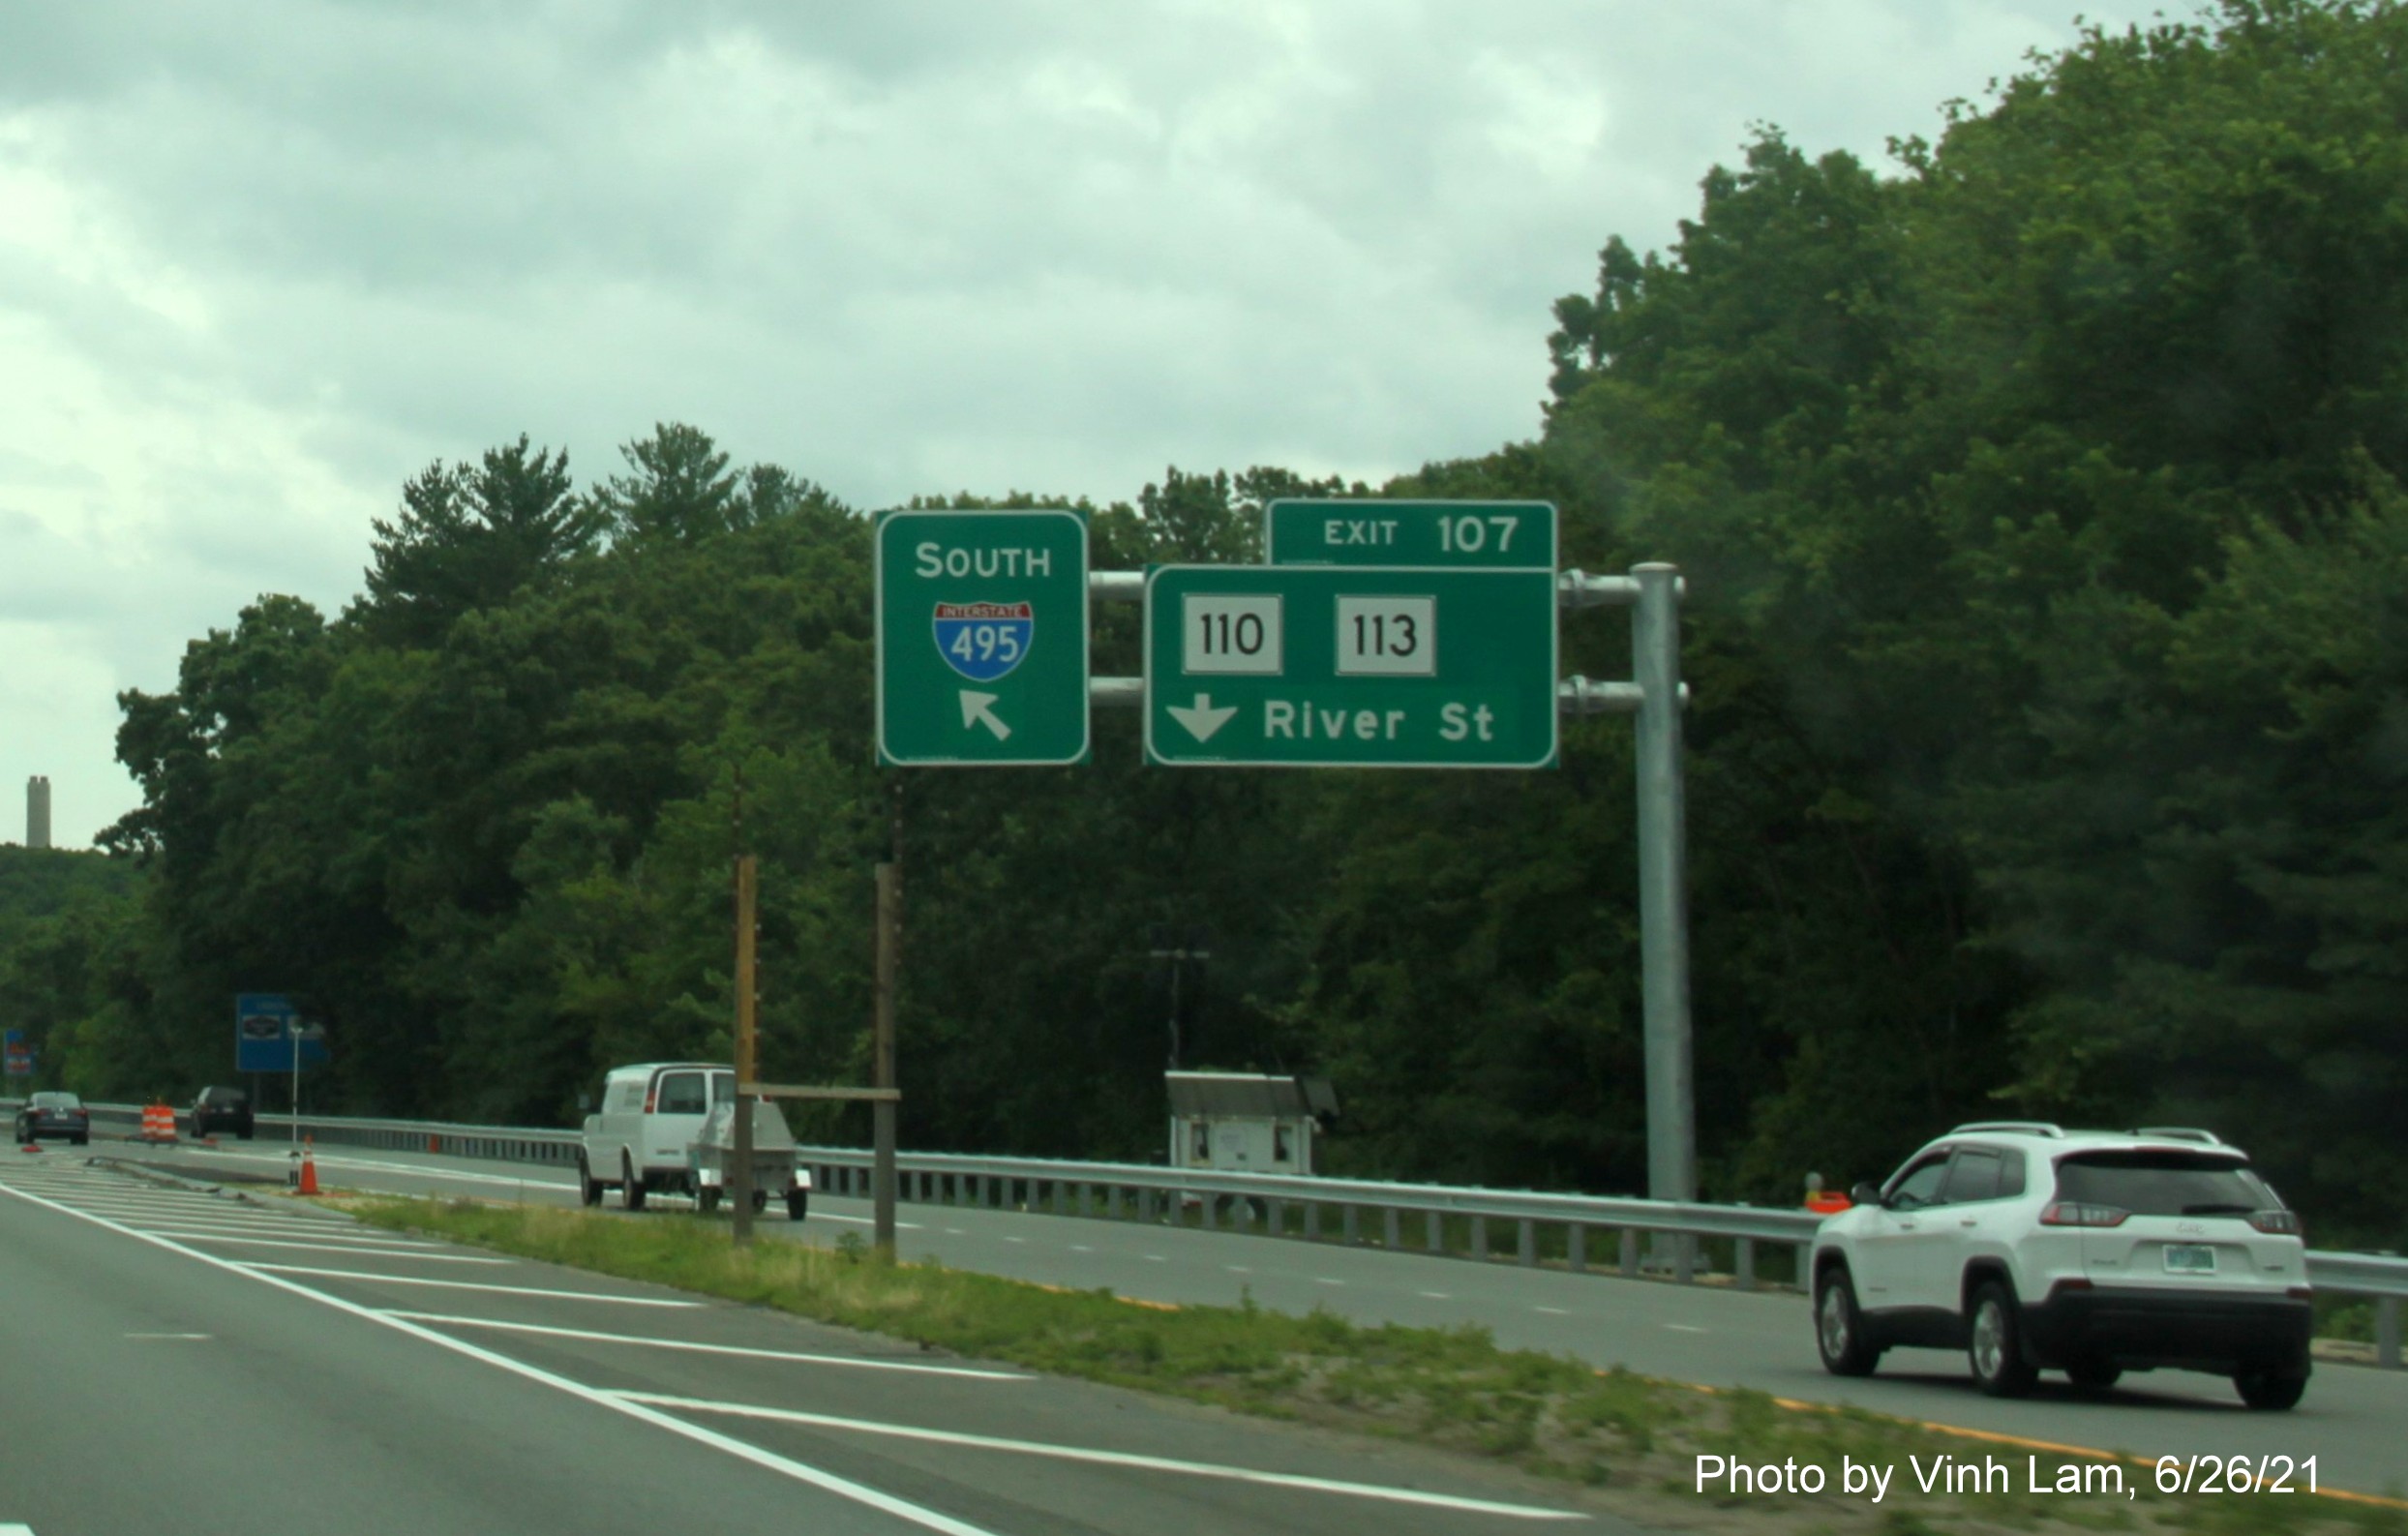 Image of overhead ramp sign on C/D lanes for MA 110/113 exit with new milepost based exit number as seen from I-495 South in Haverhill, photo by Vinh Lam, June 2021